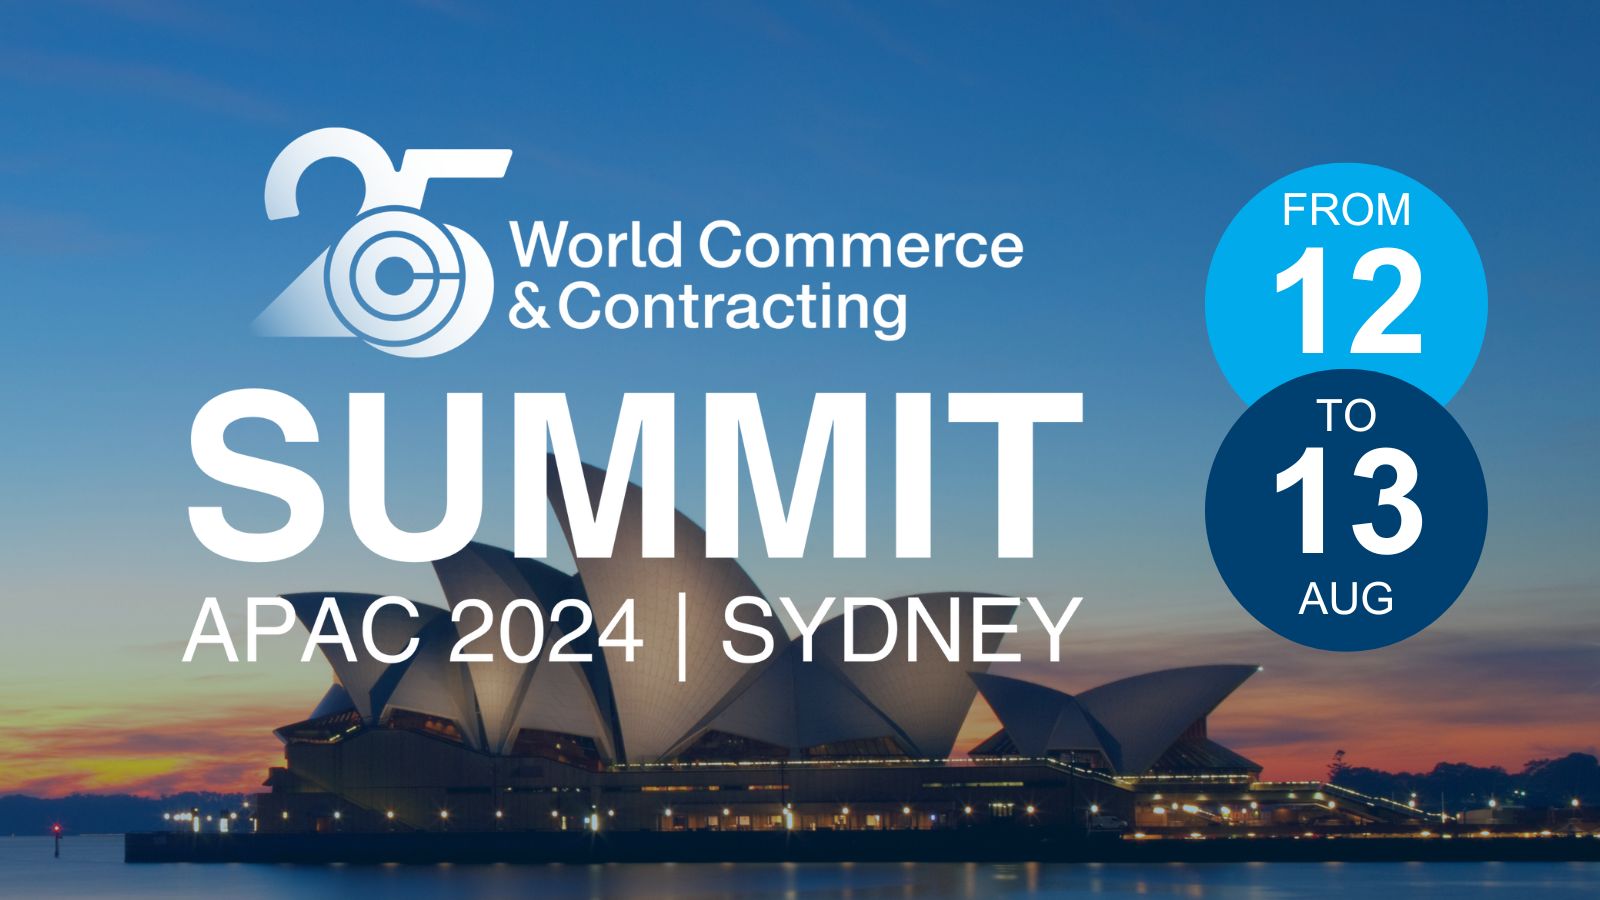 World Commerce and Contracting Summit - APAC 2024, The Rocks, New South Wales, Australia